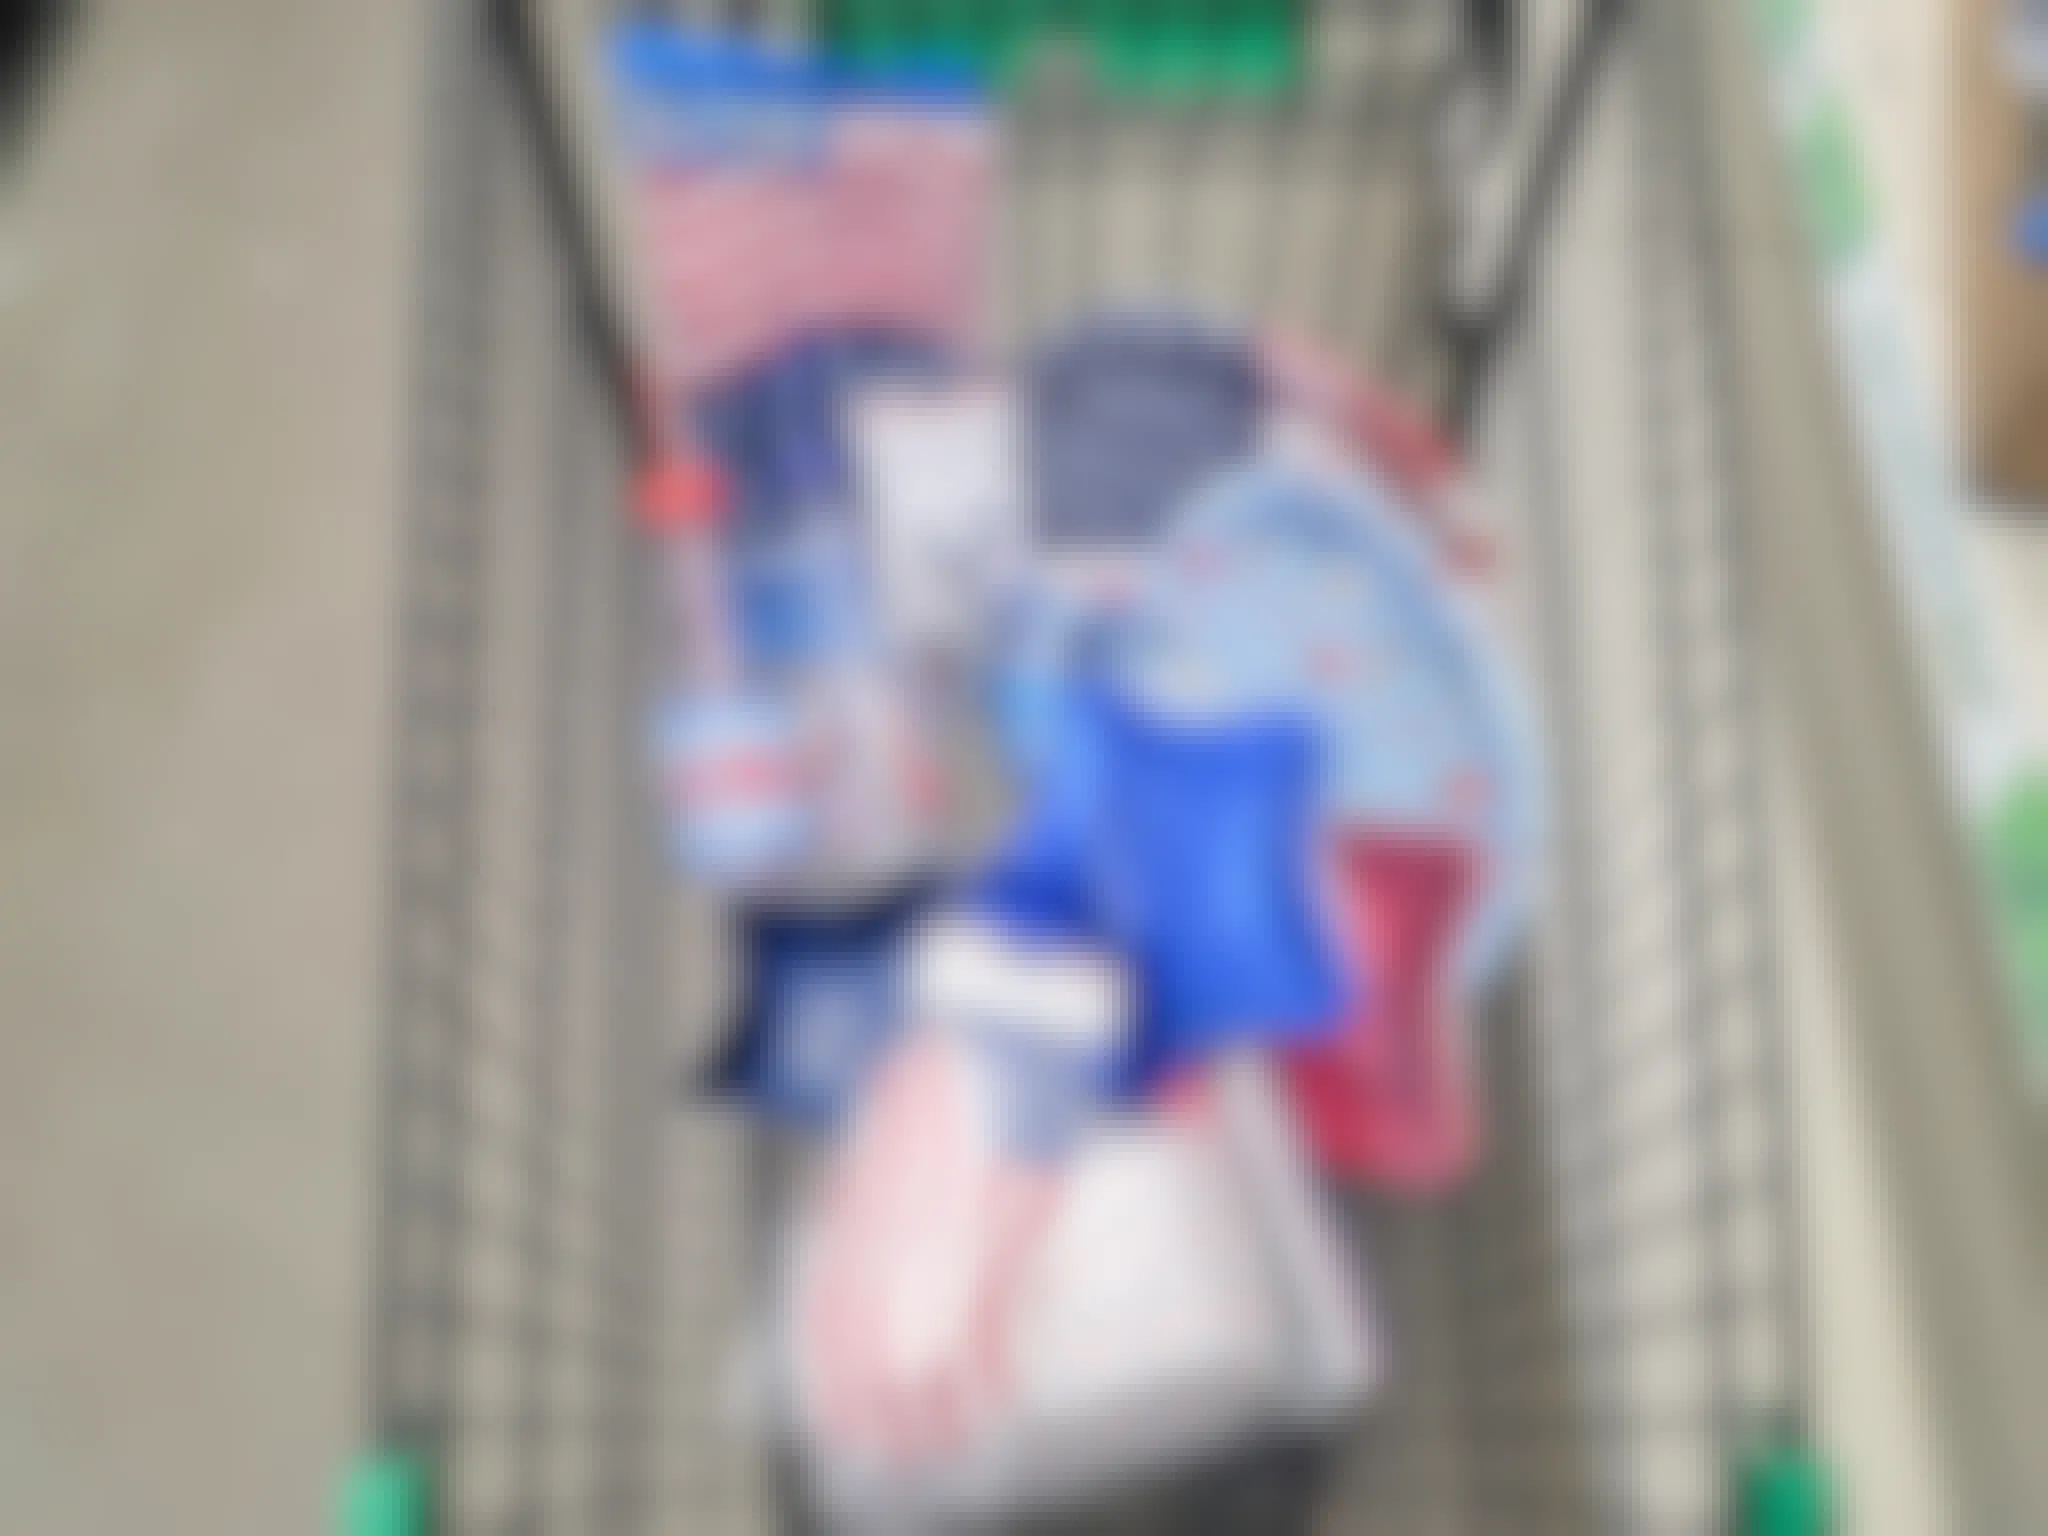 patriotic party supplies in a cart